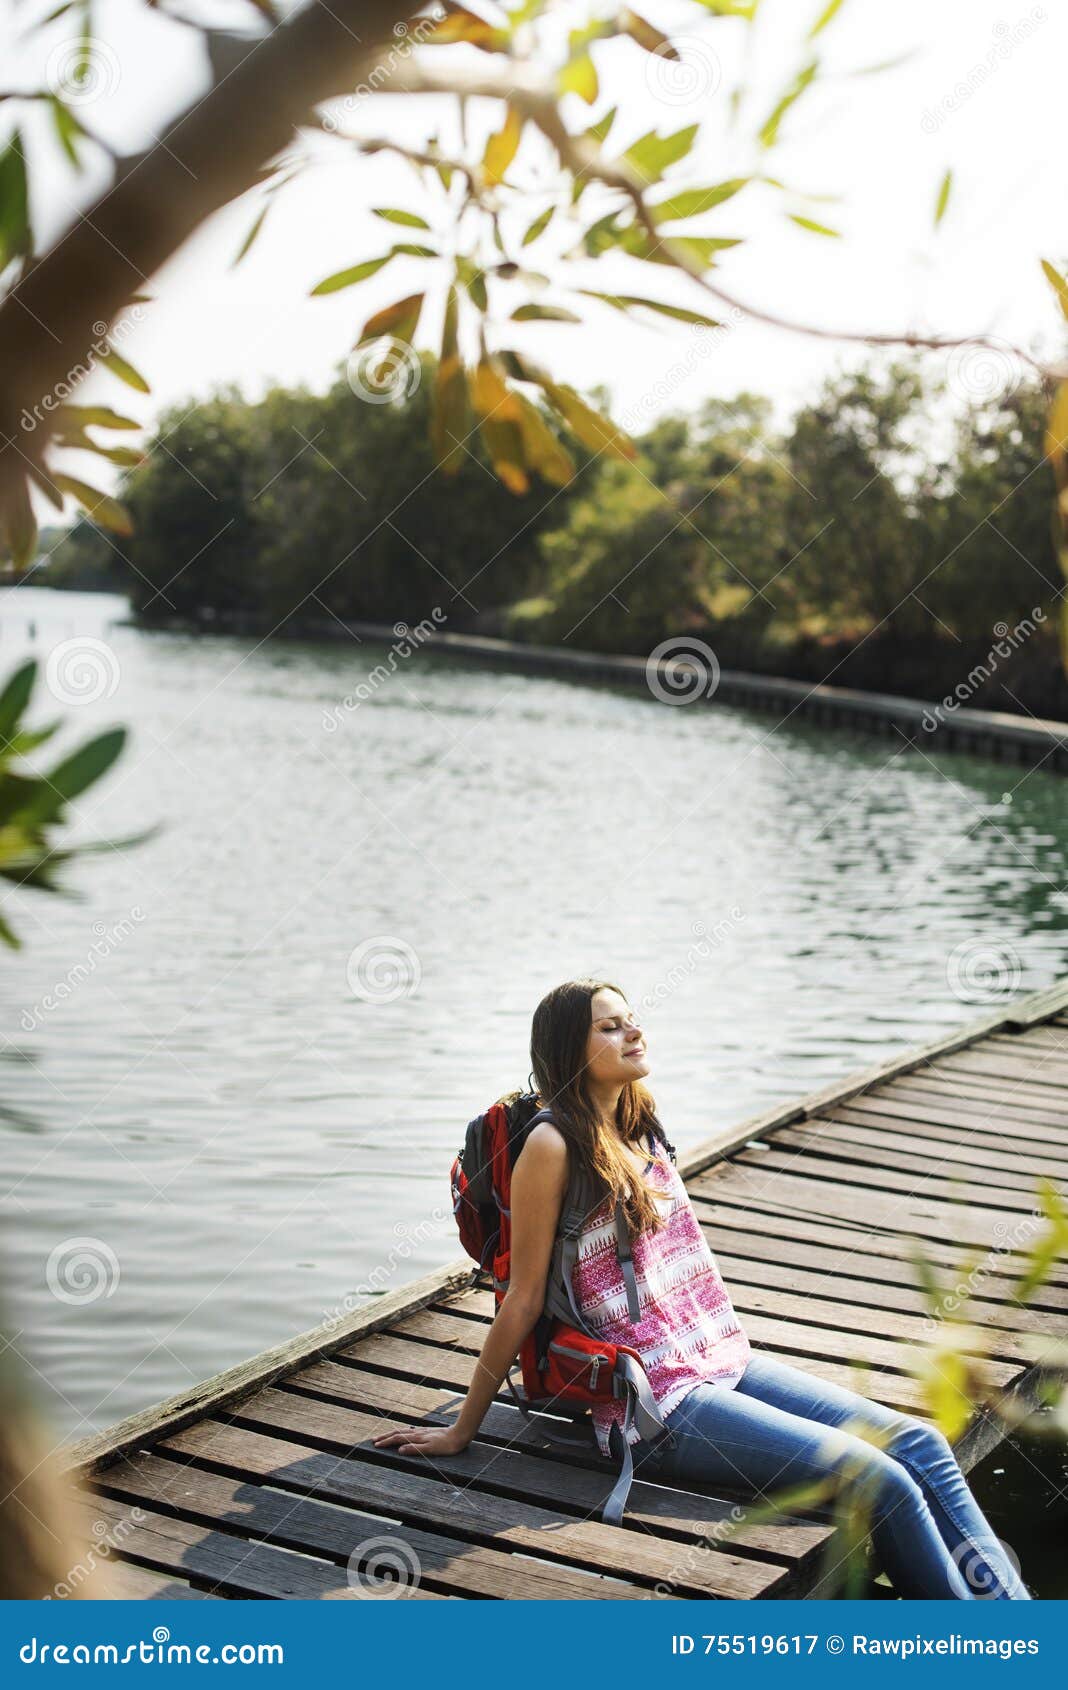 woman relax nature vacation wanderlust concept